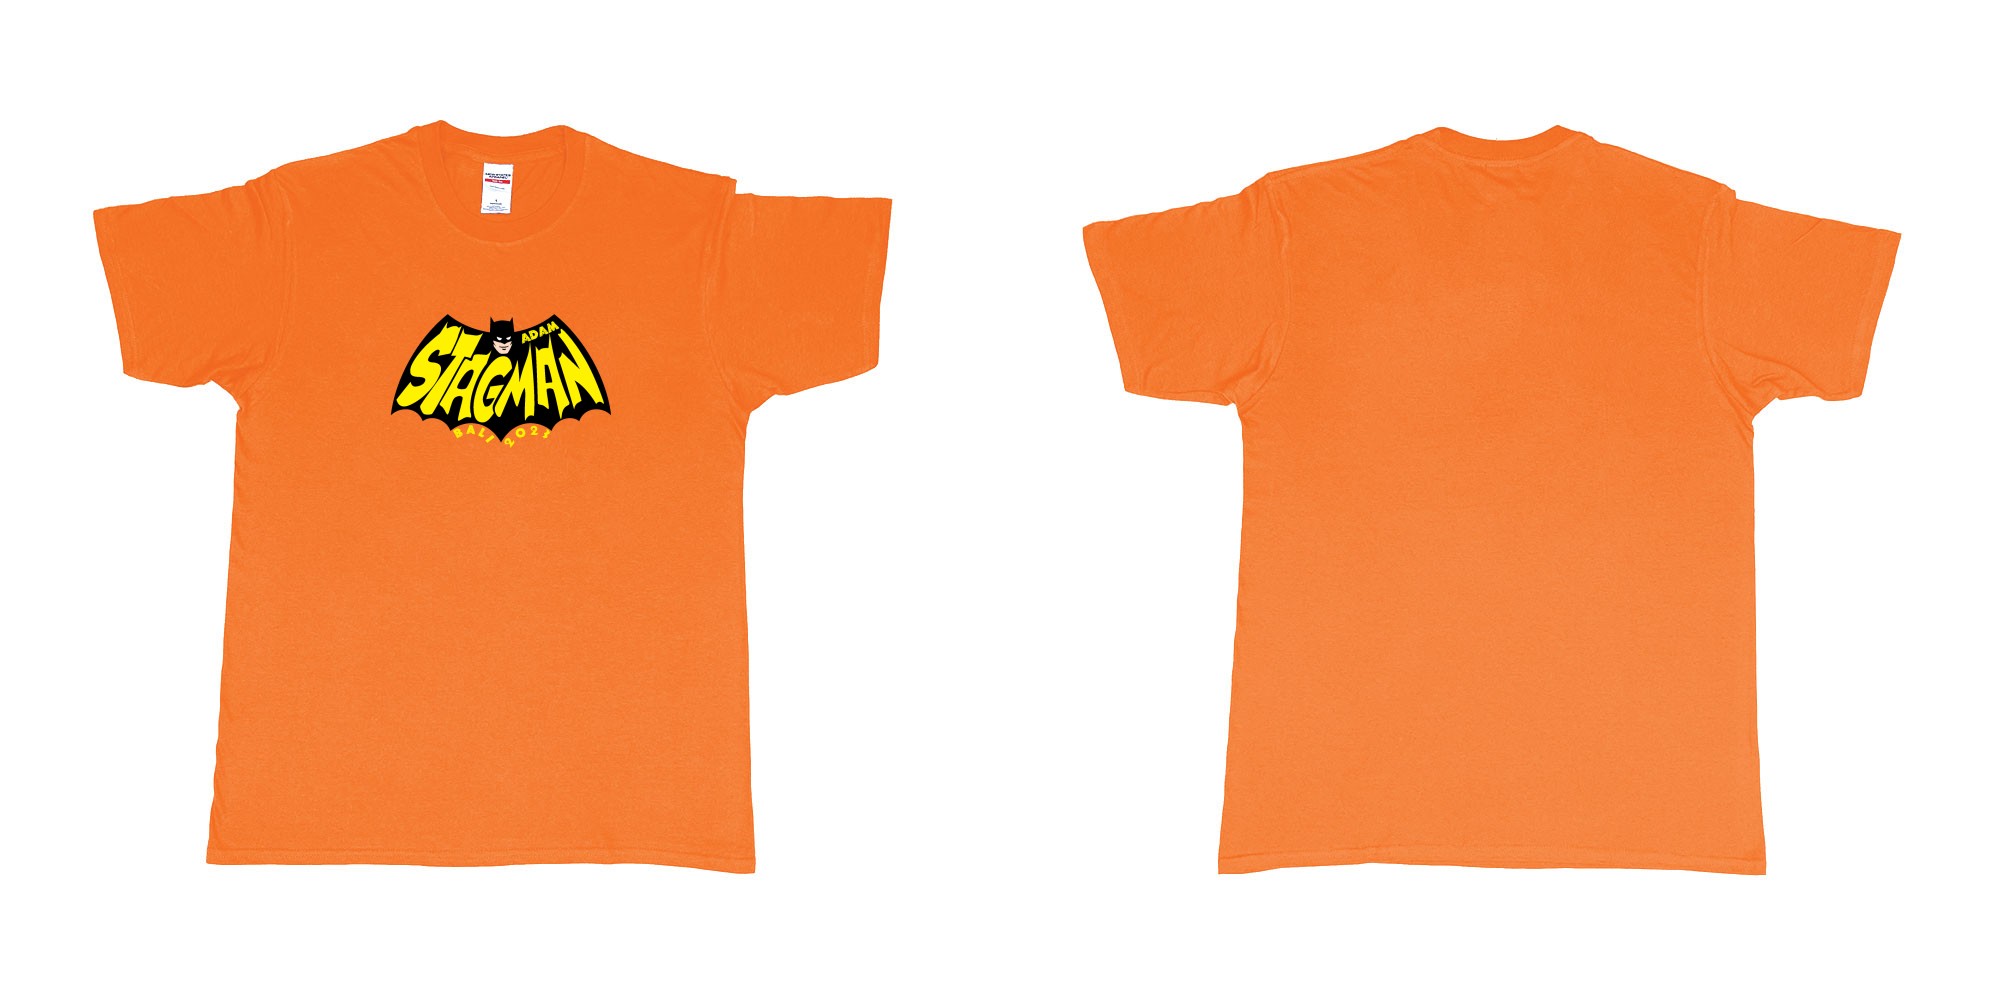 Custom tshirt design Batman StagMan Old School in fabric color orange choice your own text made in Bali by The Pirate Way